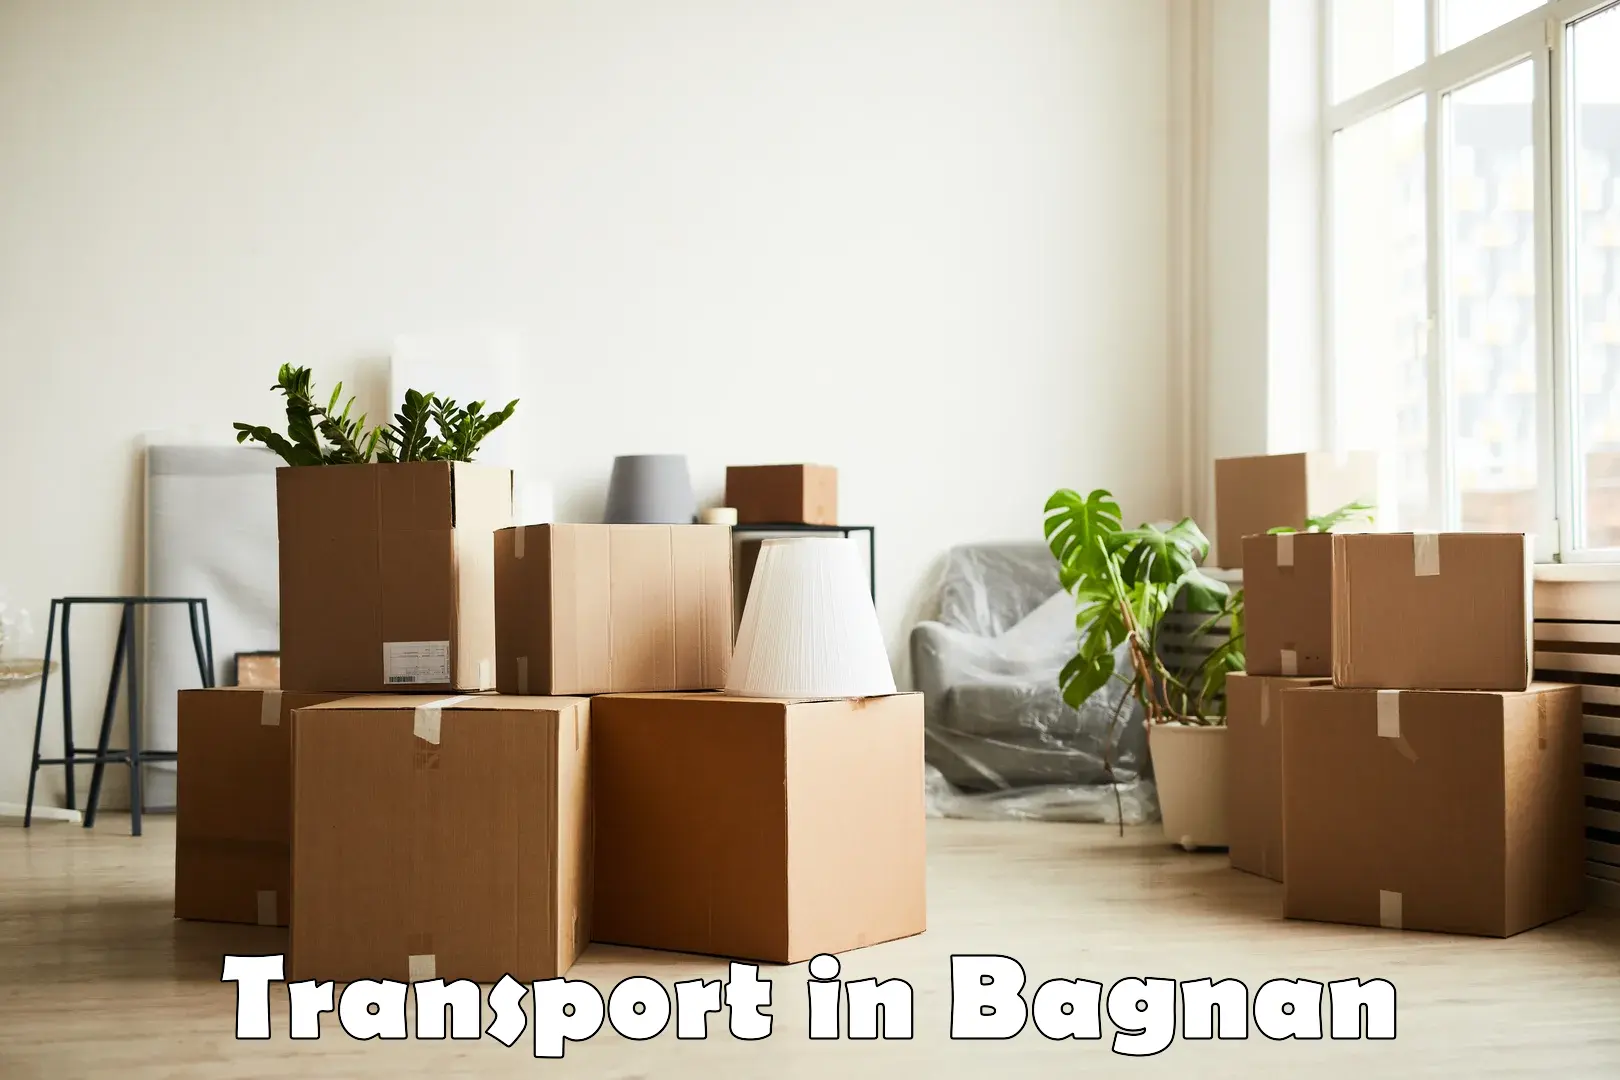 Daily parcel service transport in Bagnan